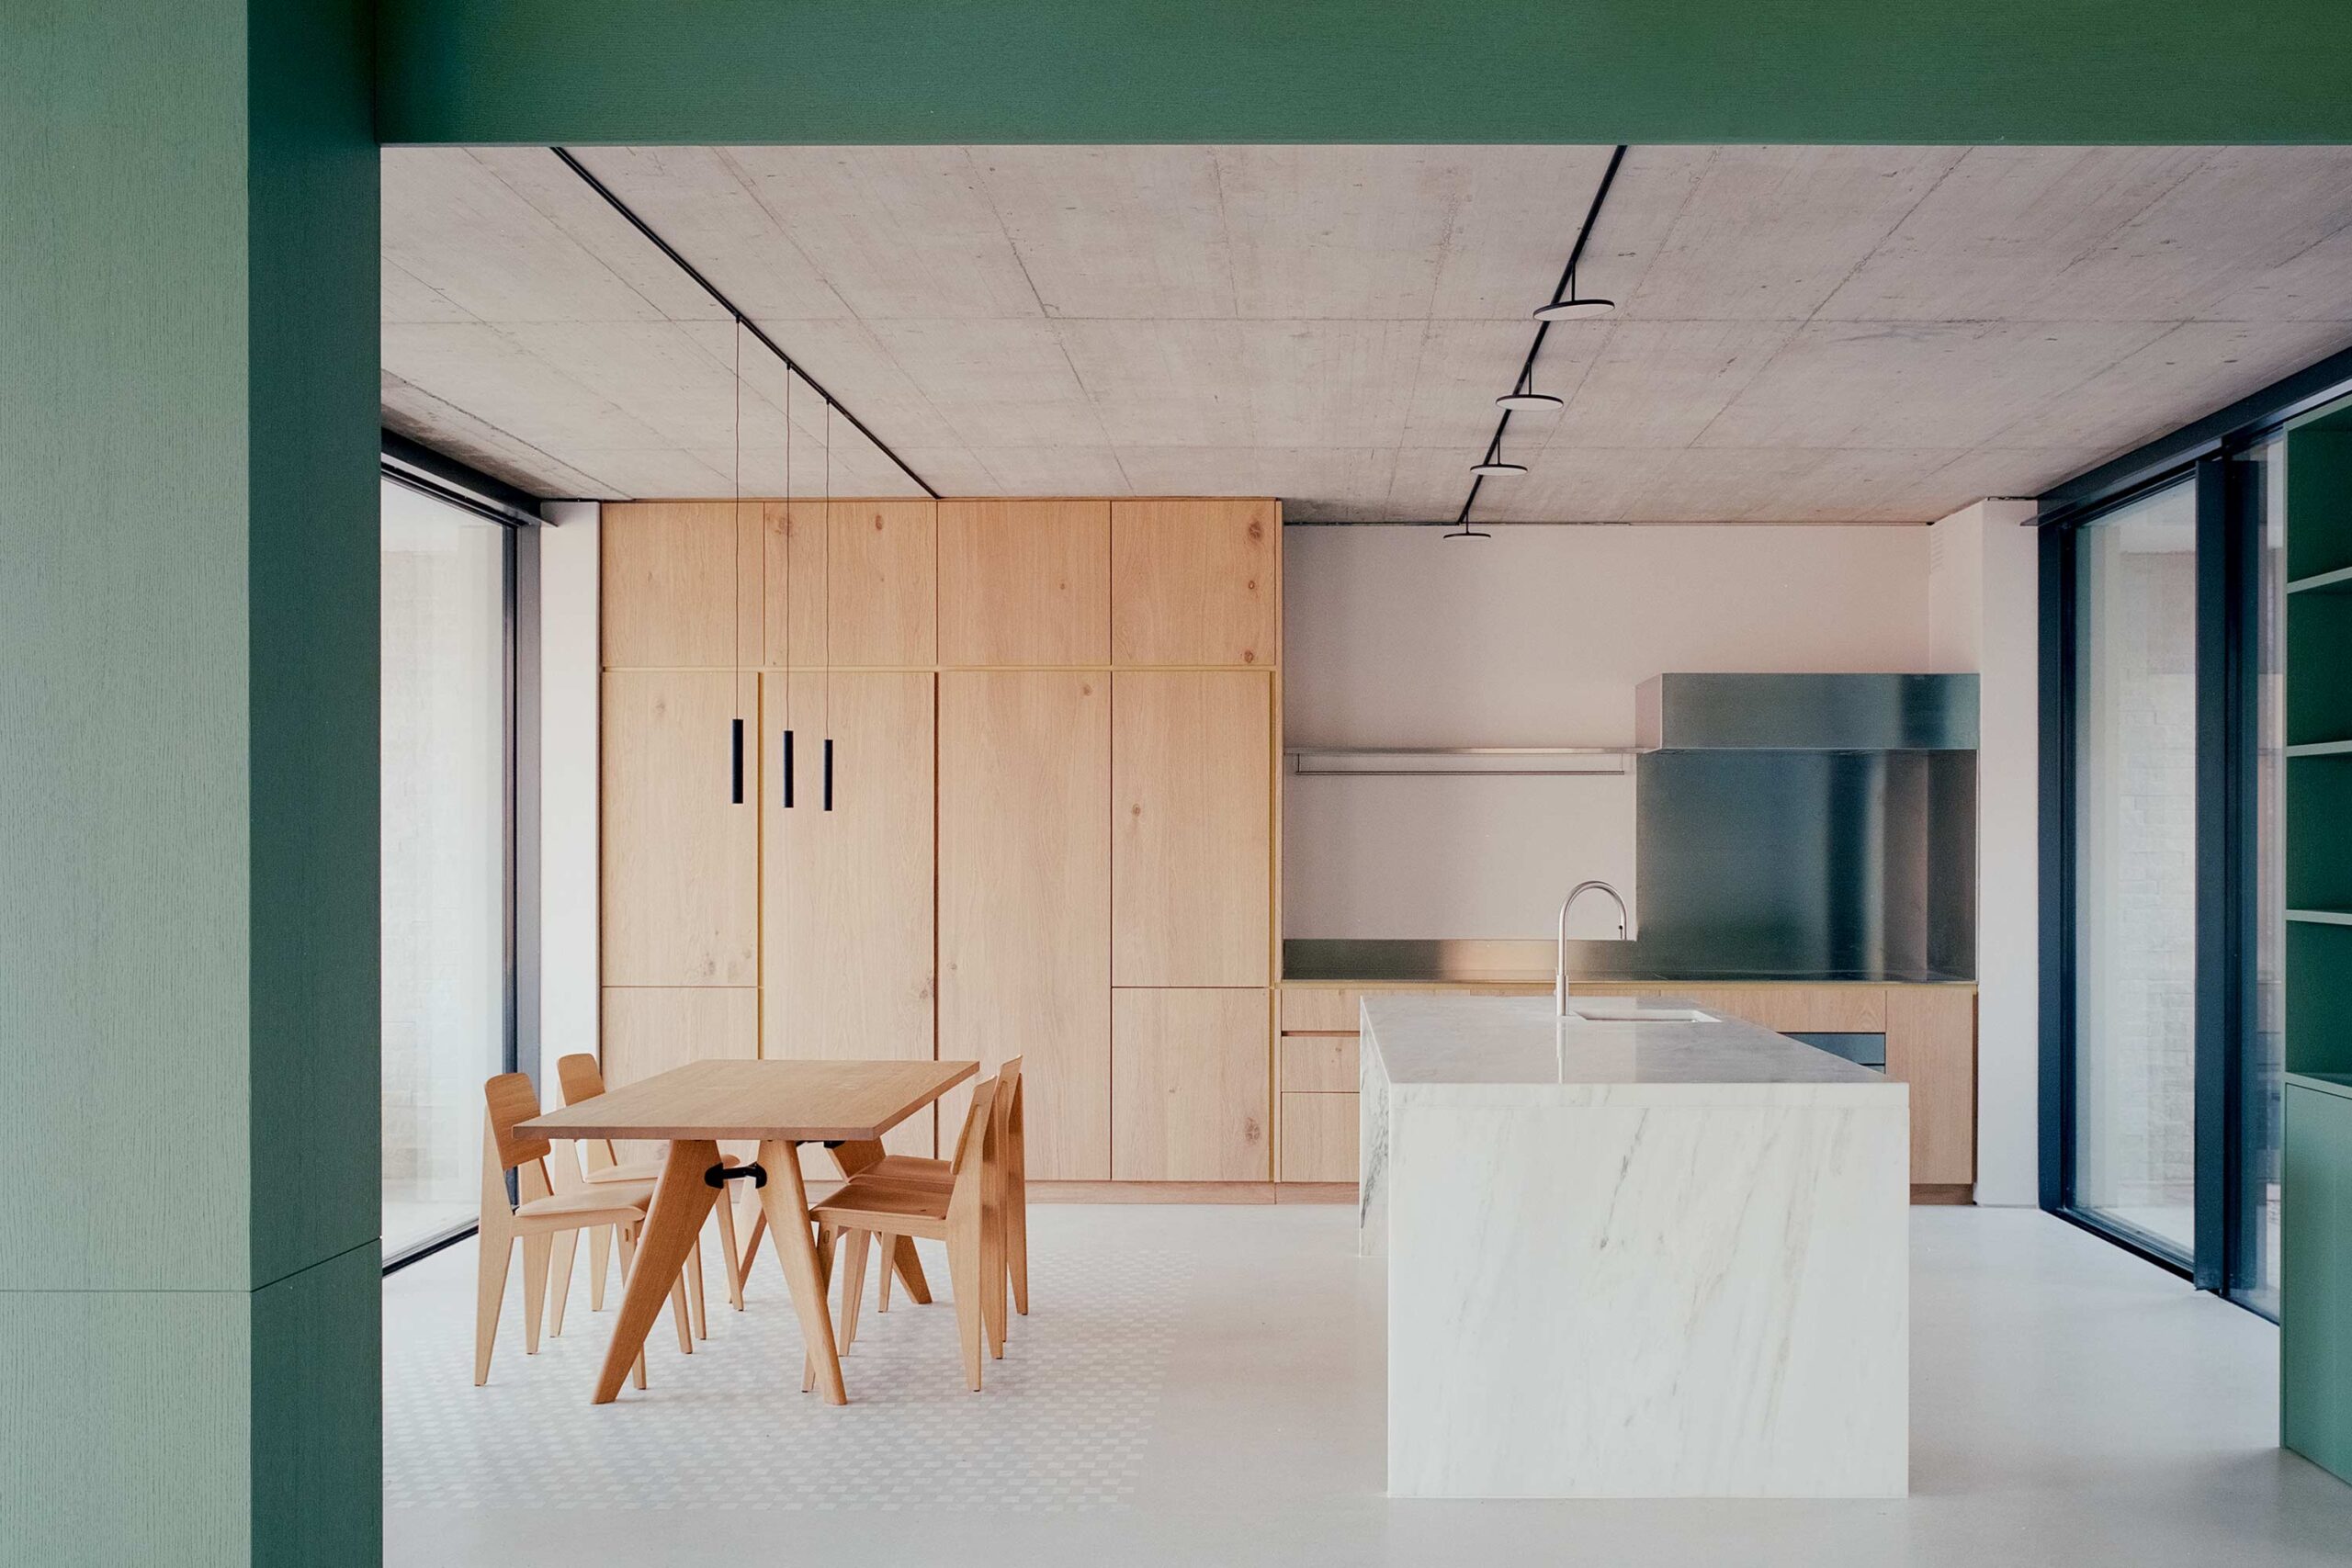 The original rough concrete ceiling is contrasted with a refined kitchen material palette of marble and oak.